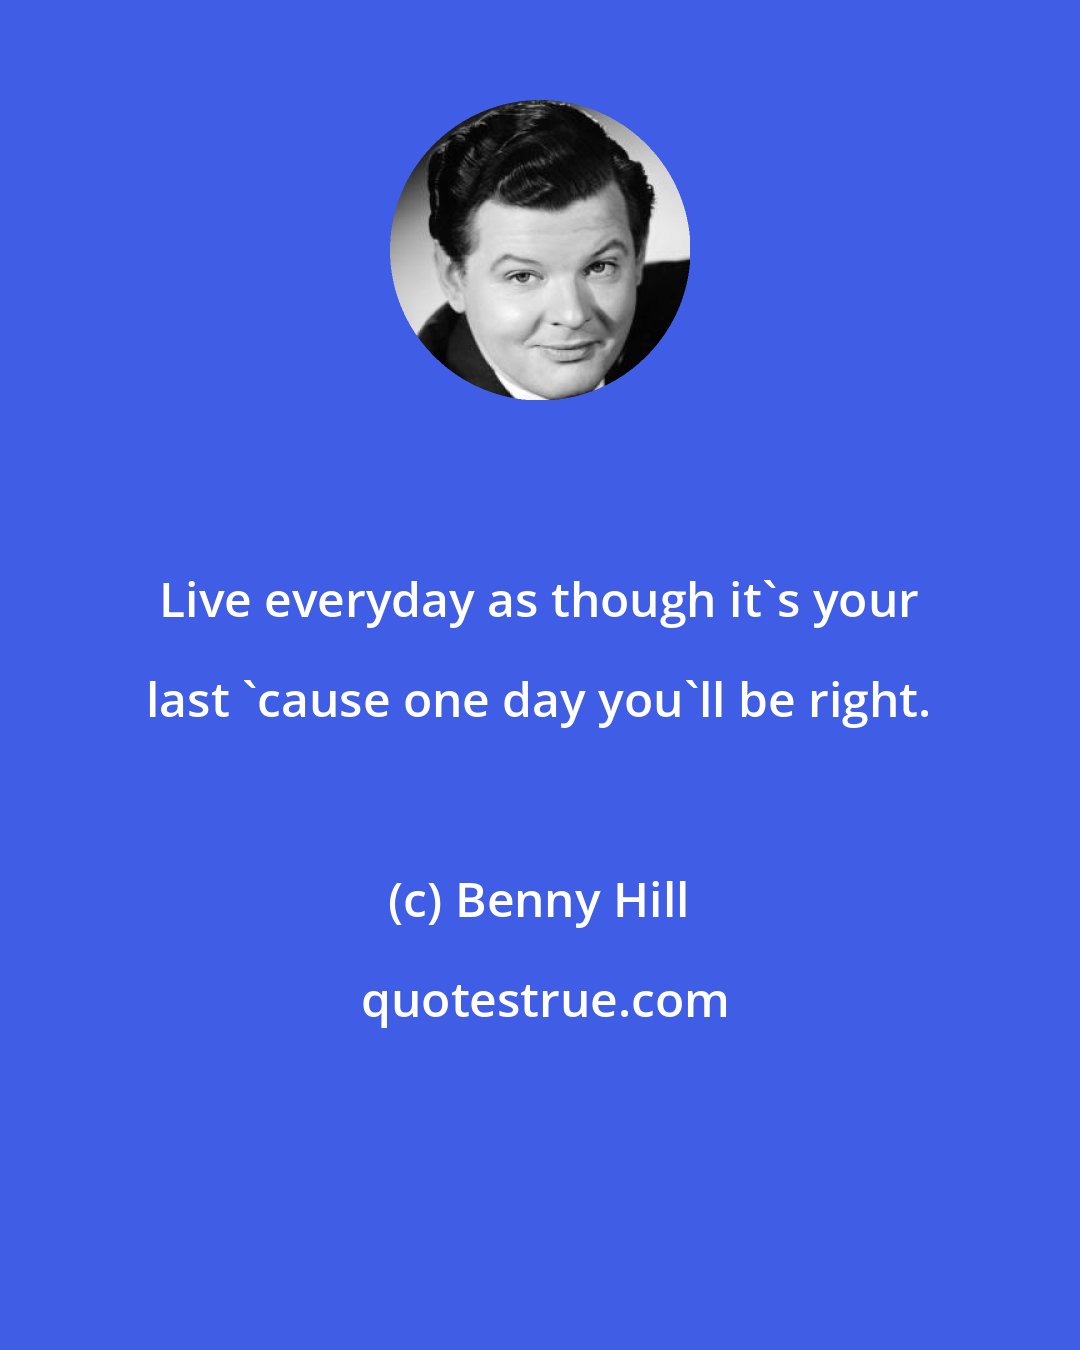 Benny Hill: Live everyday as though it's your last 'cause one day you'll be right.